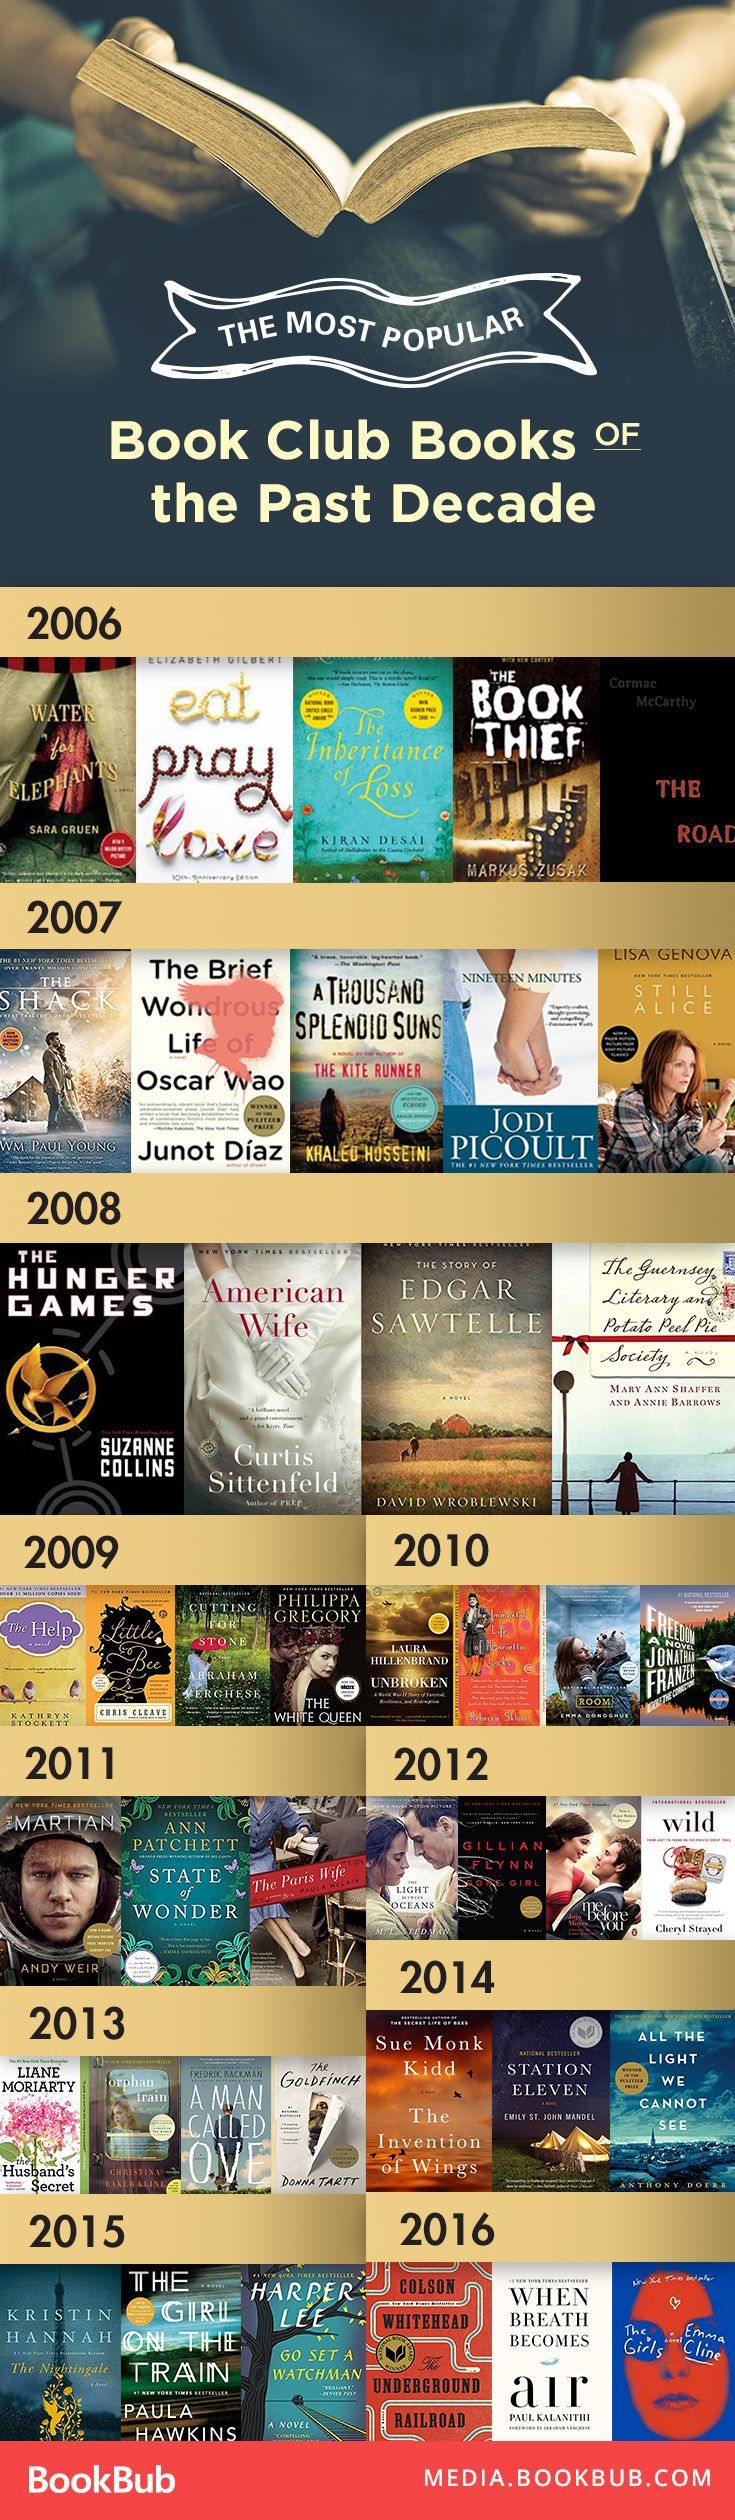 These biggest book club books from the past decade are definitely books worth reading. Must add to your 2017 reading list!